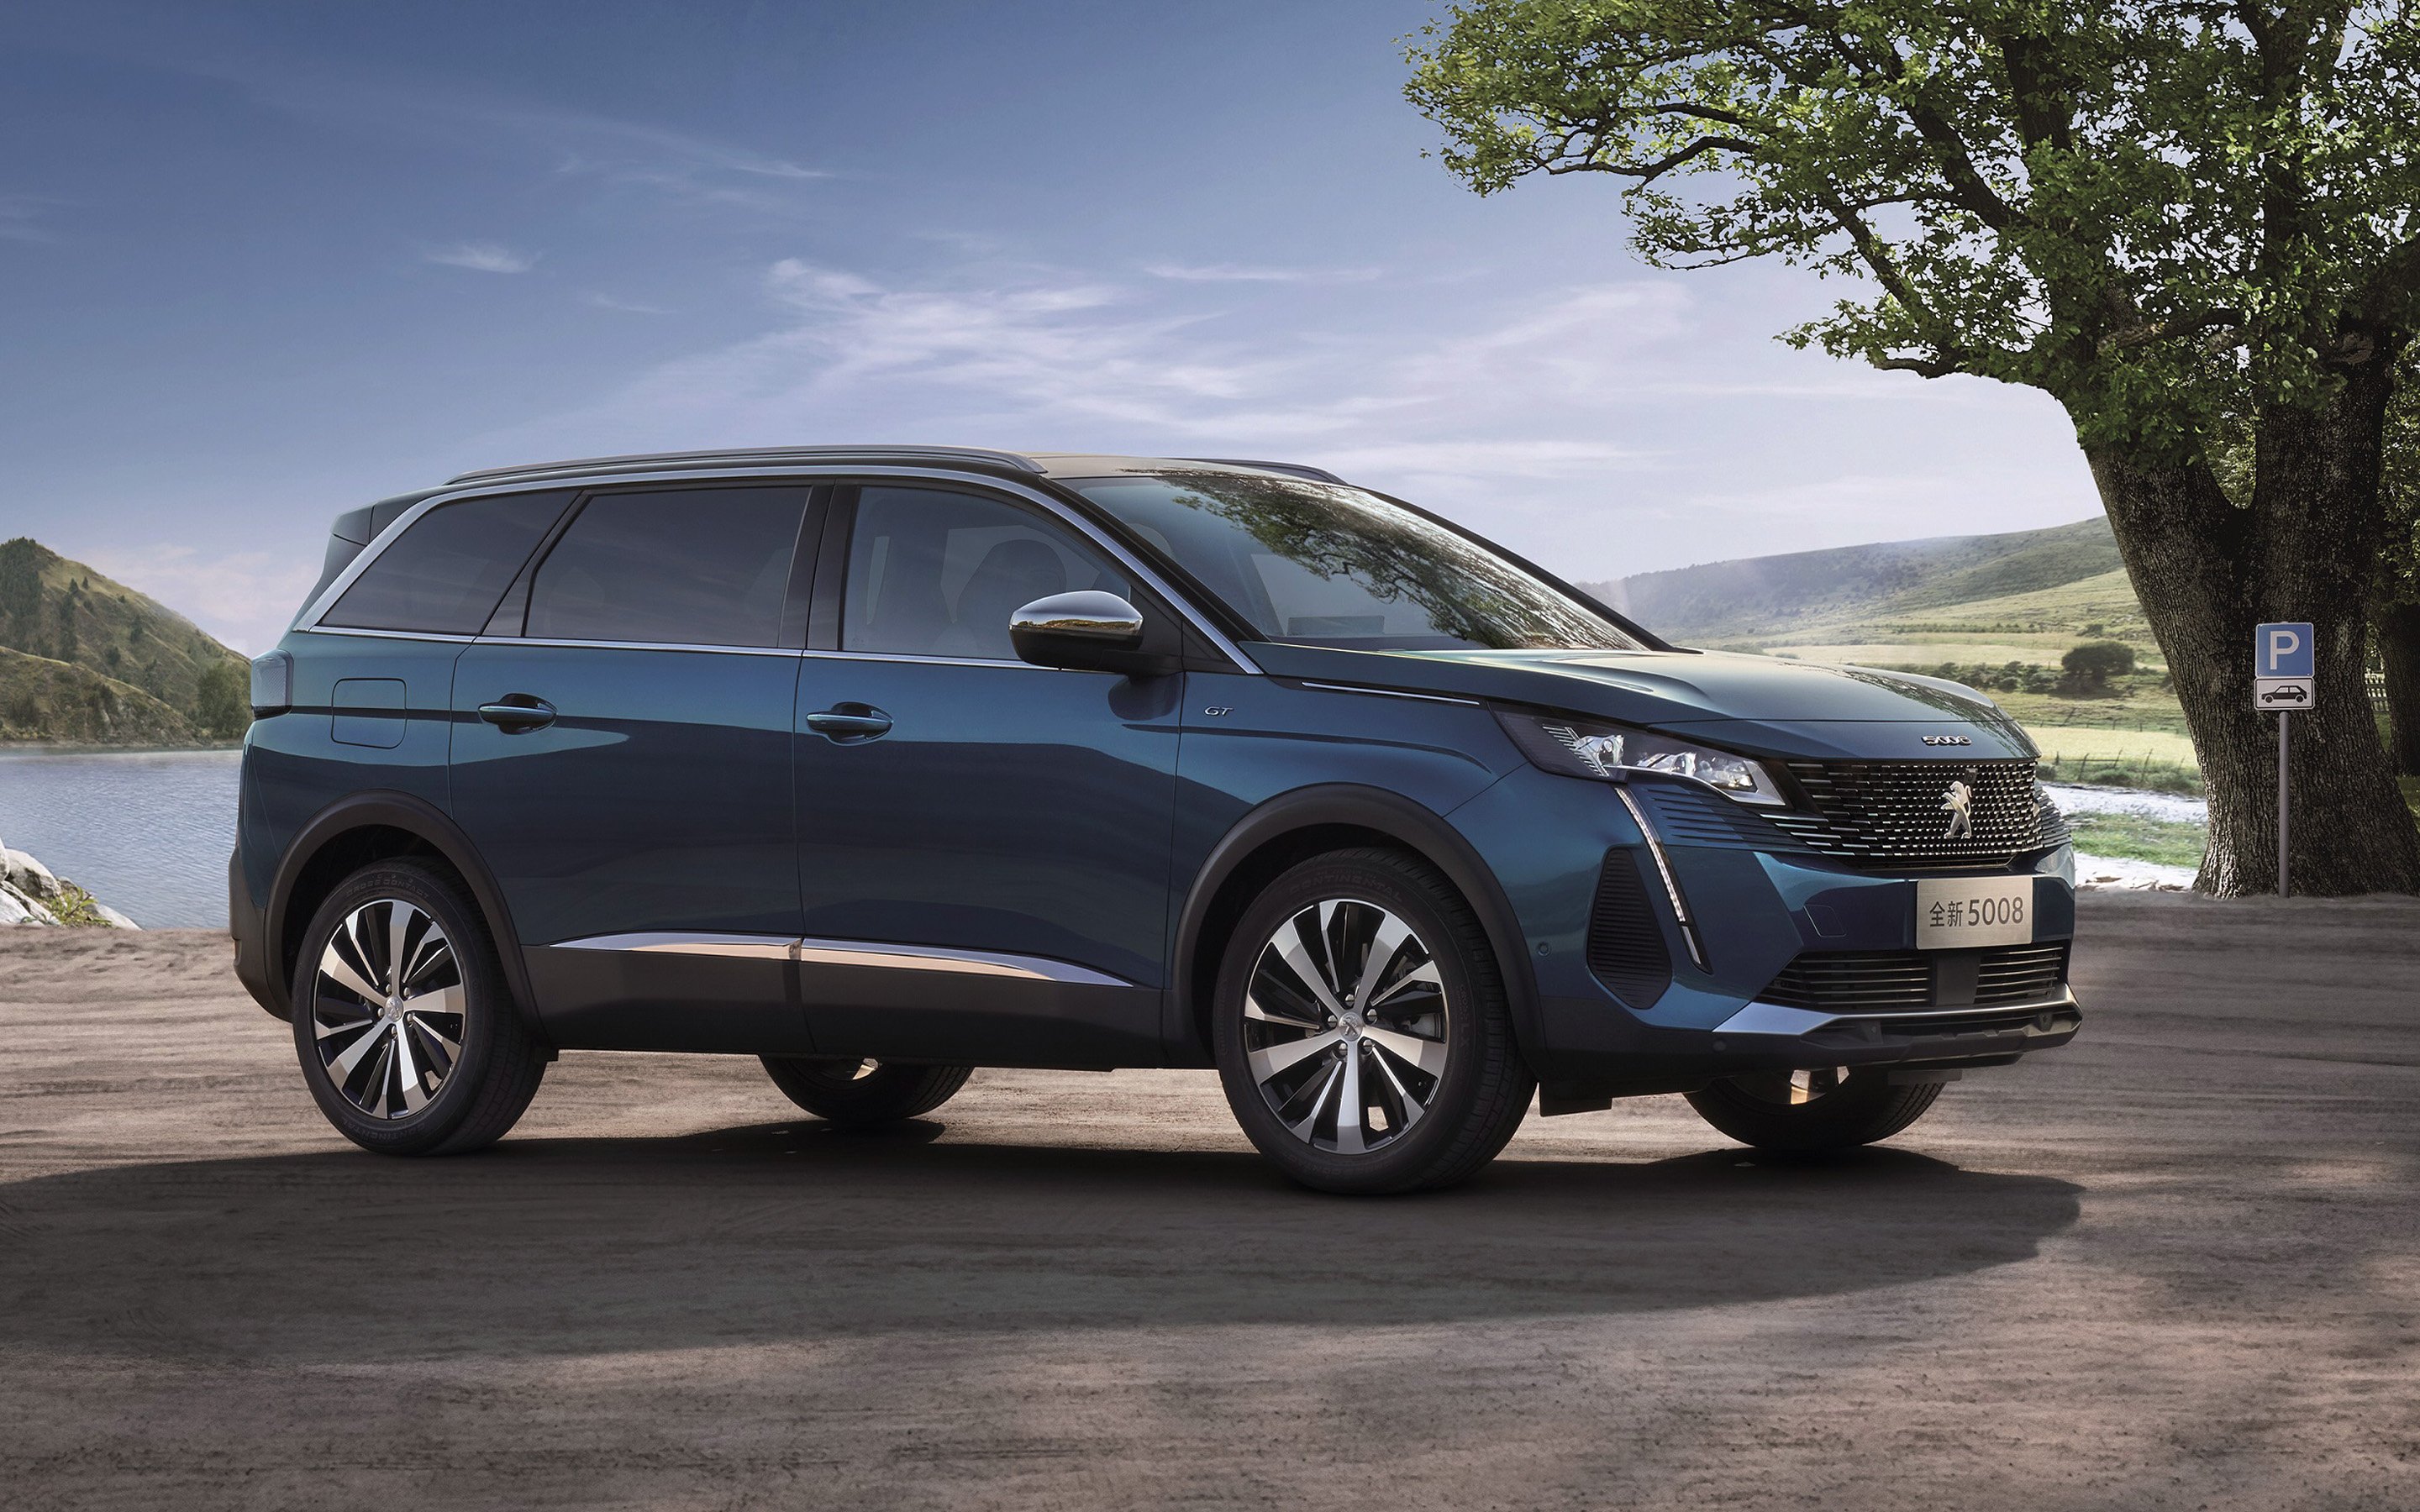 Peugeot 5008, Stylish crossover, French car, High-quality images, 2880x1800 HD Desktop